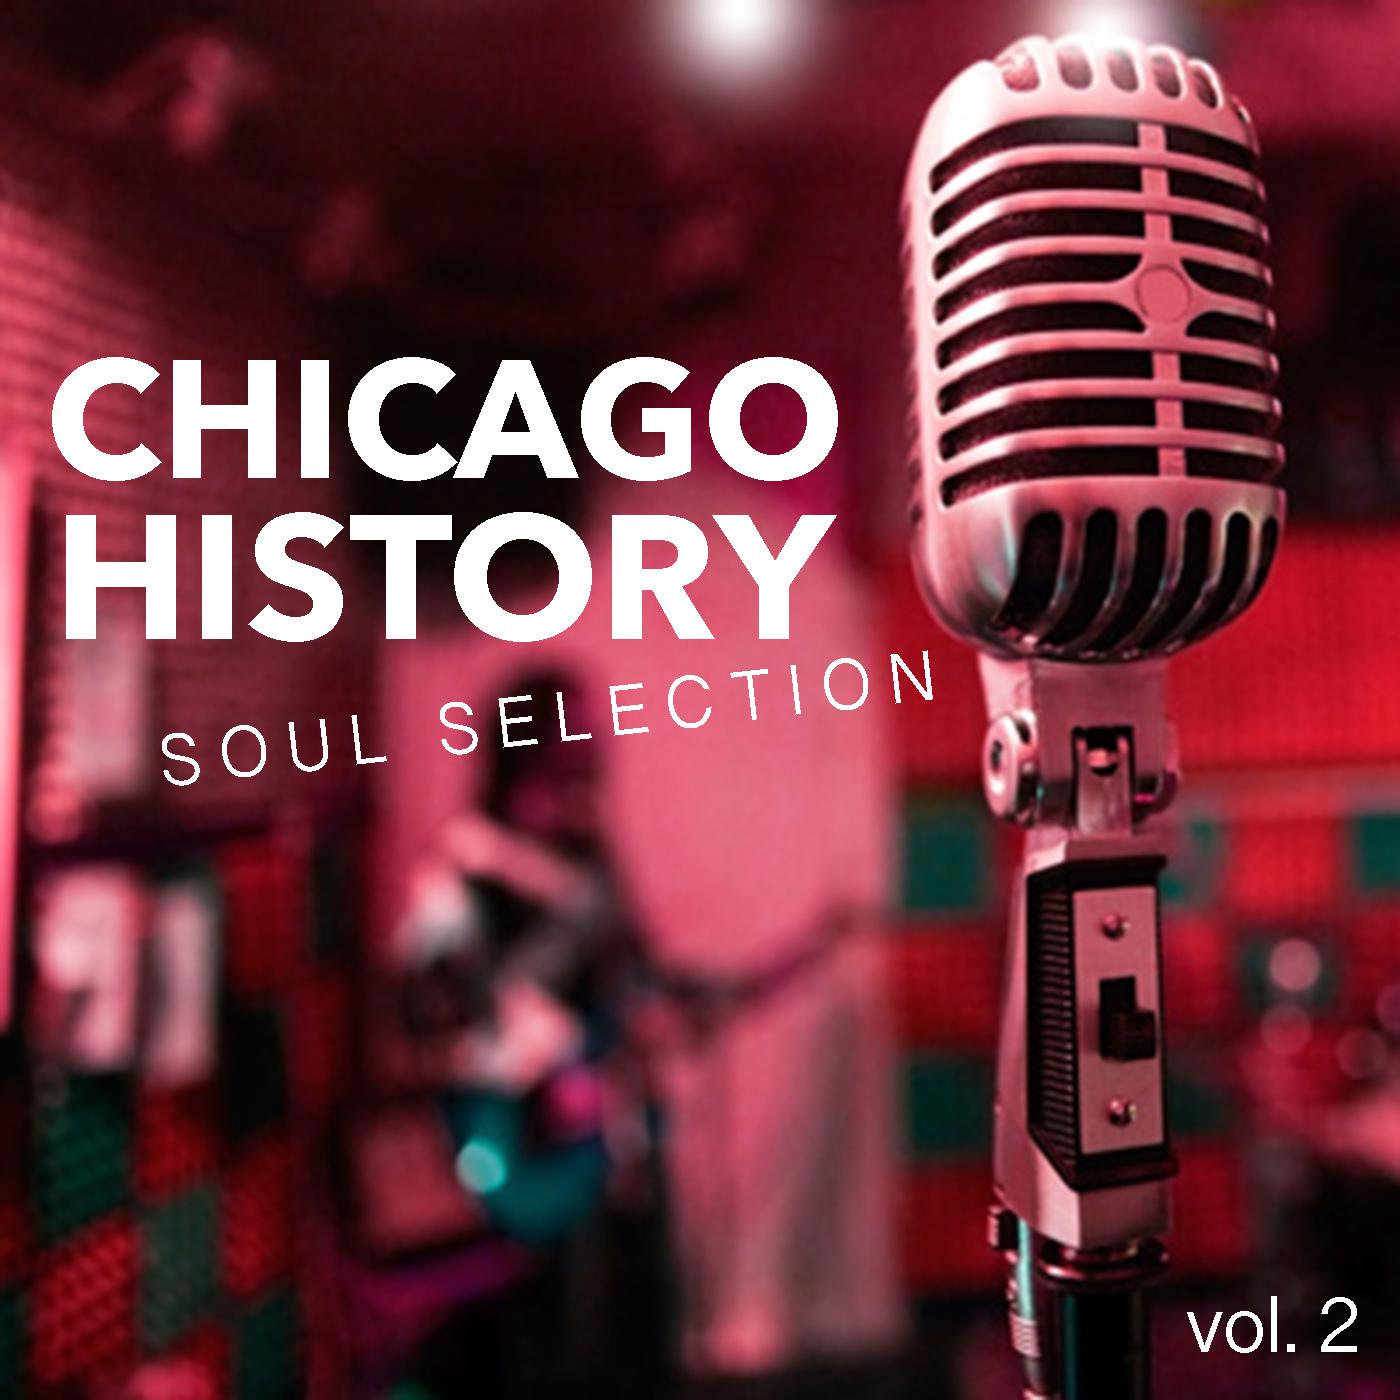 Chicago History Soul Selection vol. 2